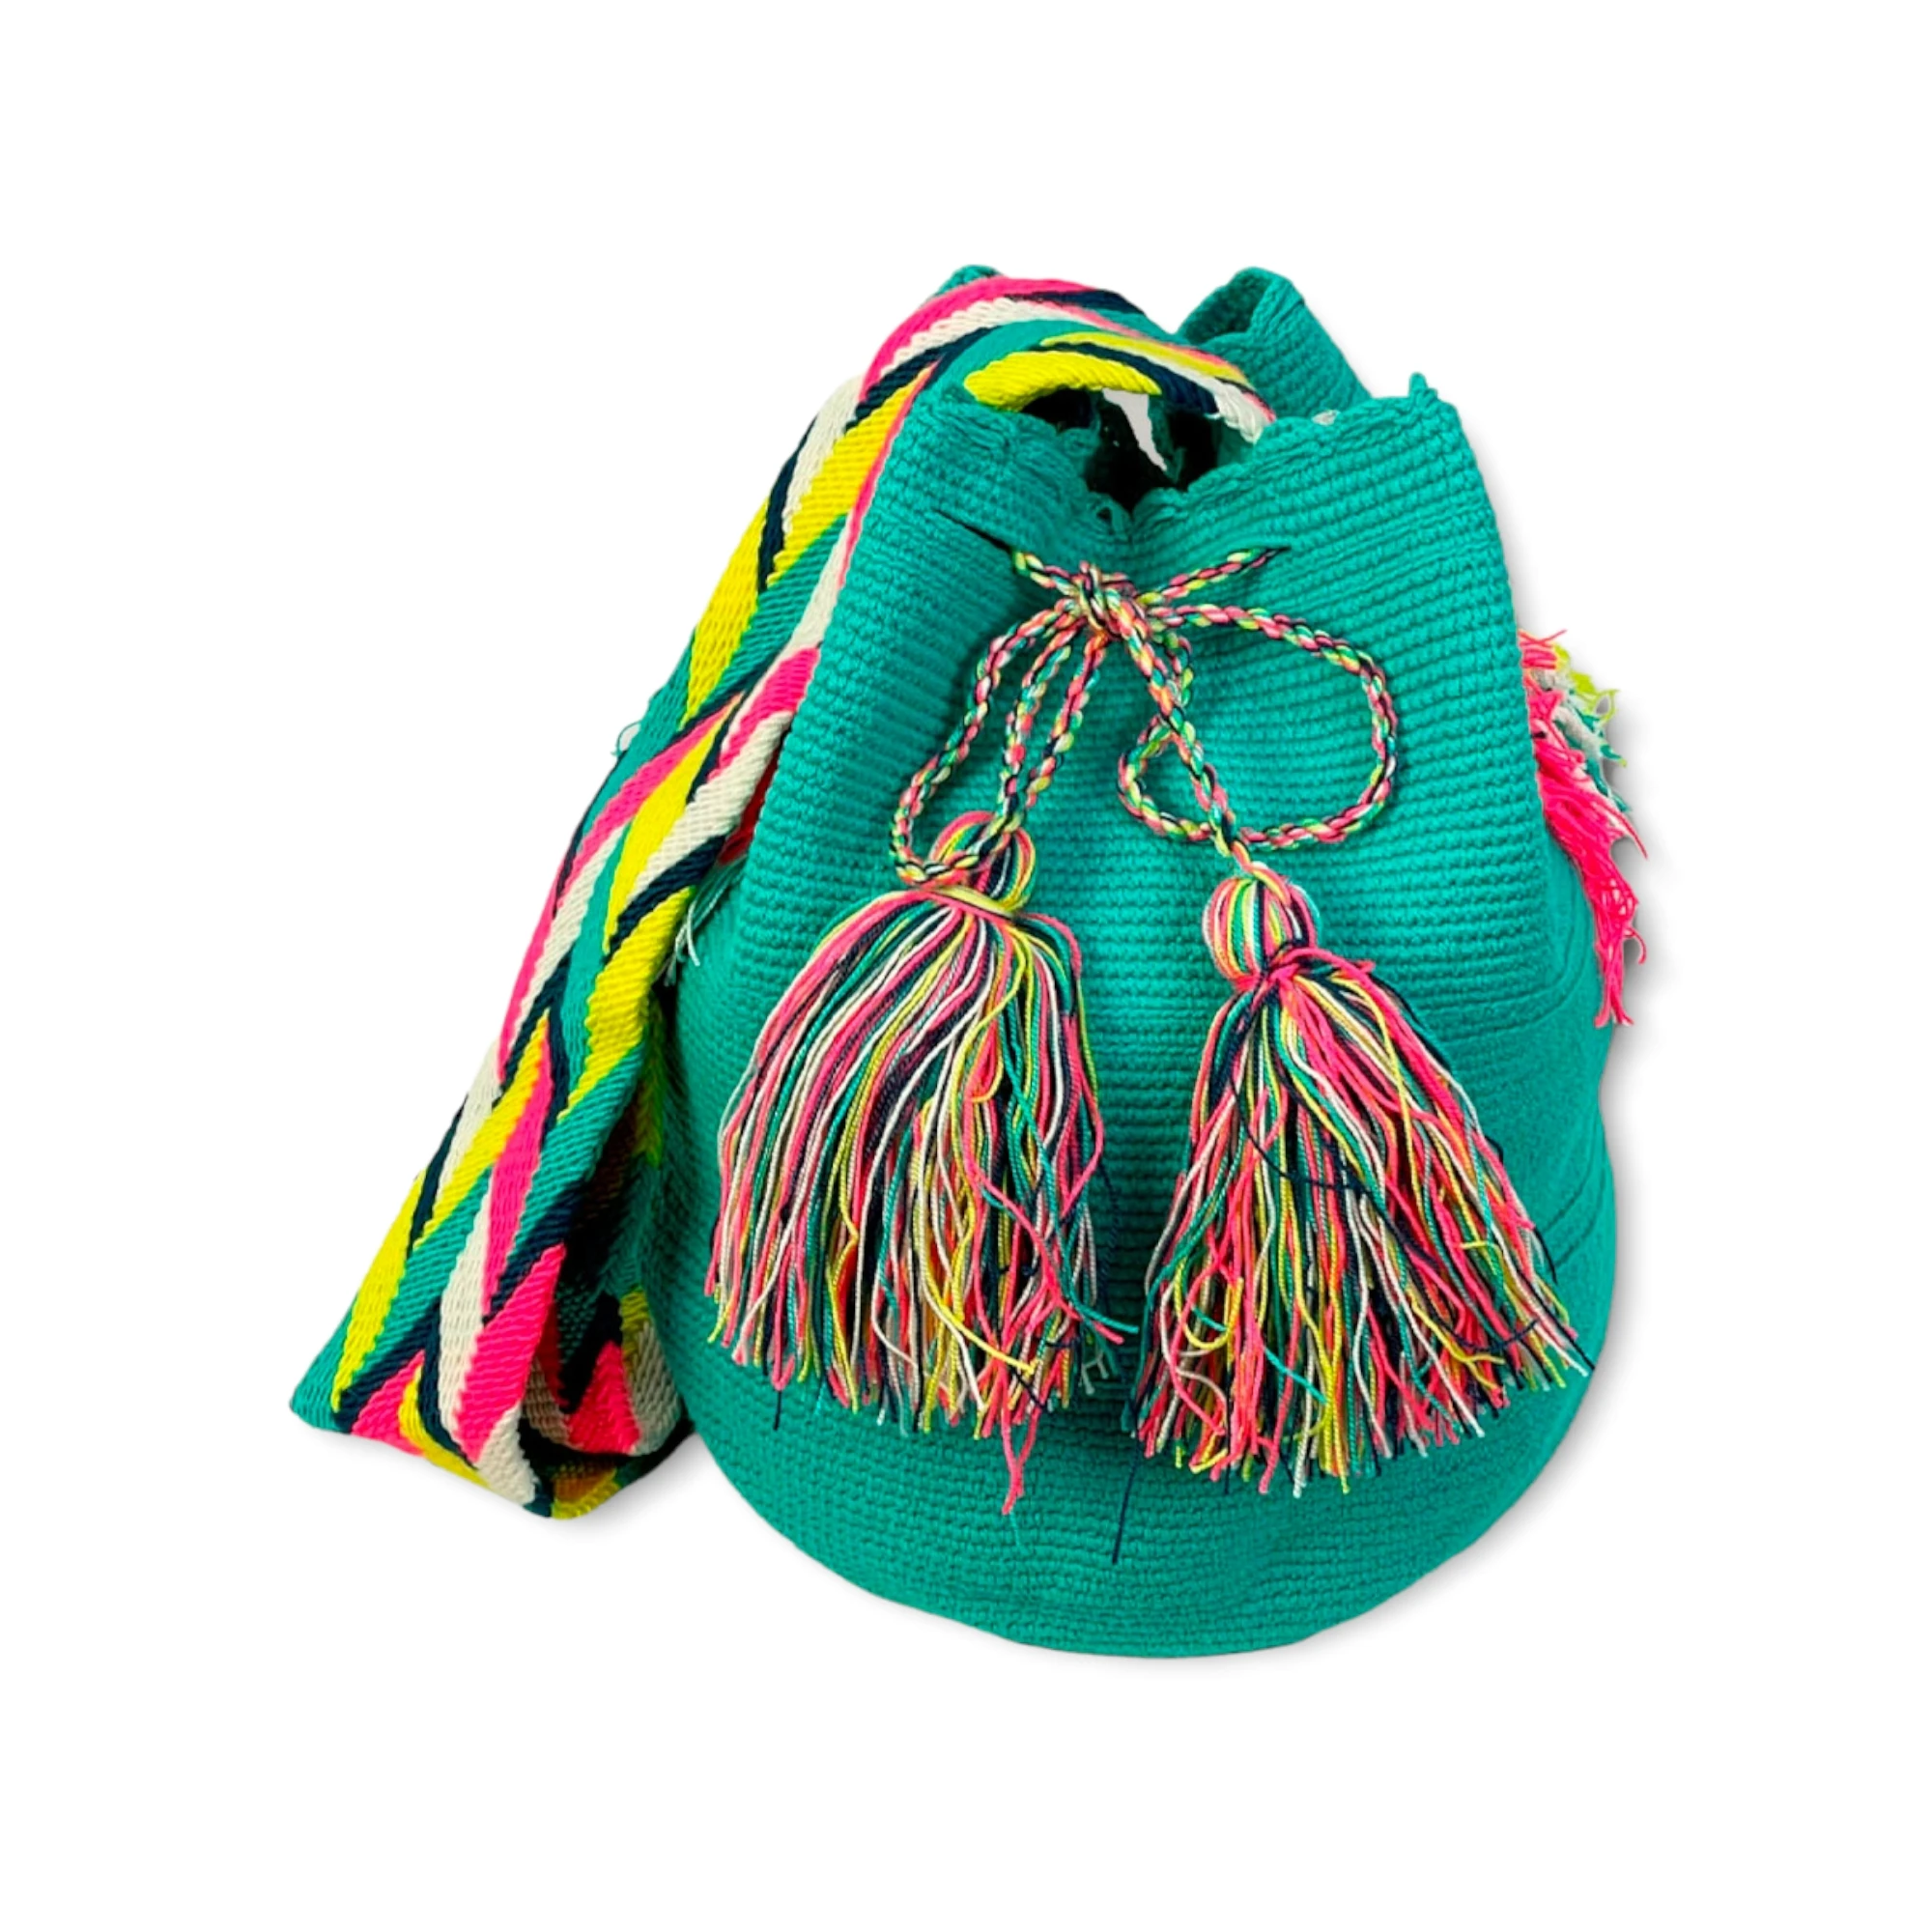 Large Wayuu tote Bag - Tapistry Birds edition – Best of Colombia